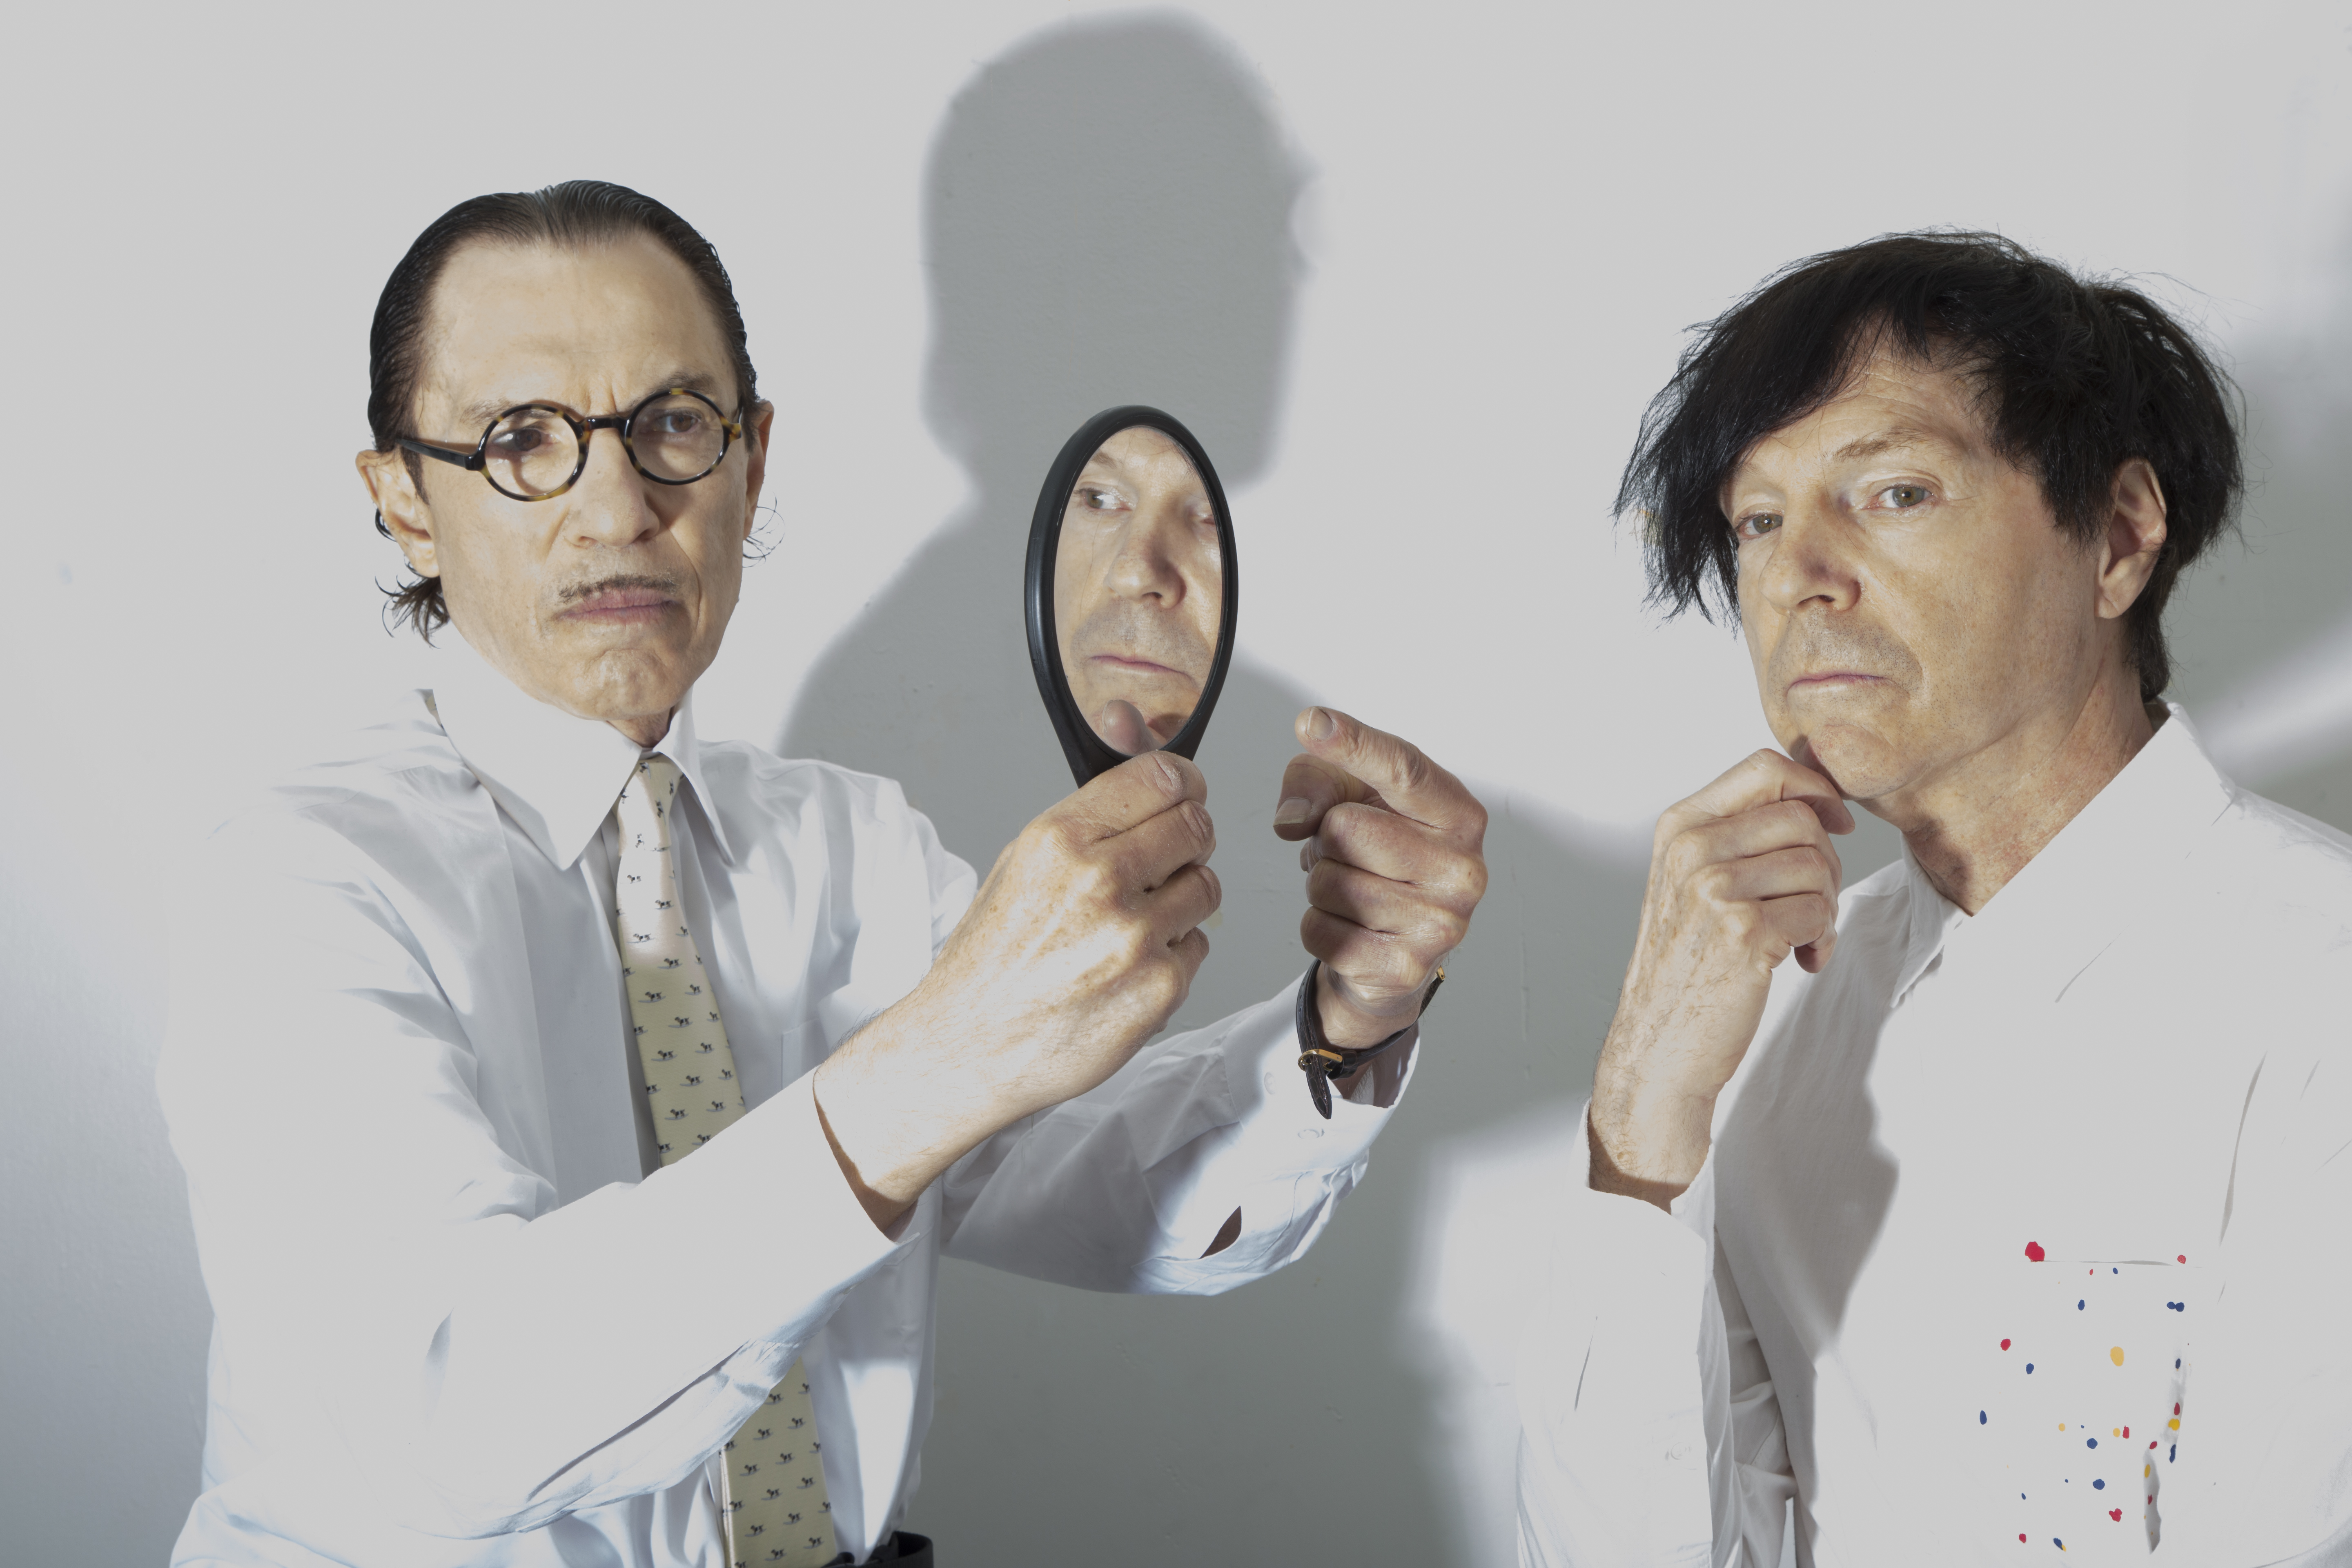 Our interview with Sparks: Ron and Russell Mael of Sparks talk their 40 years in the business